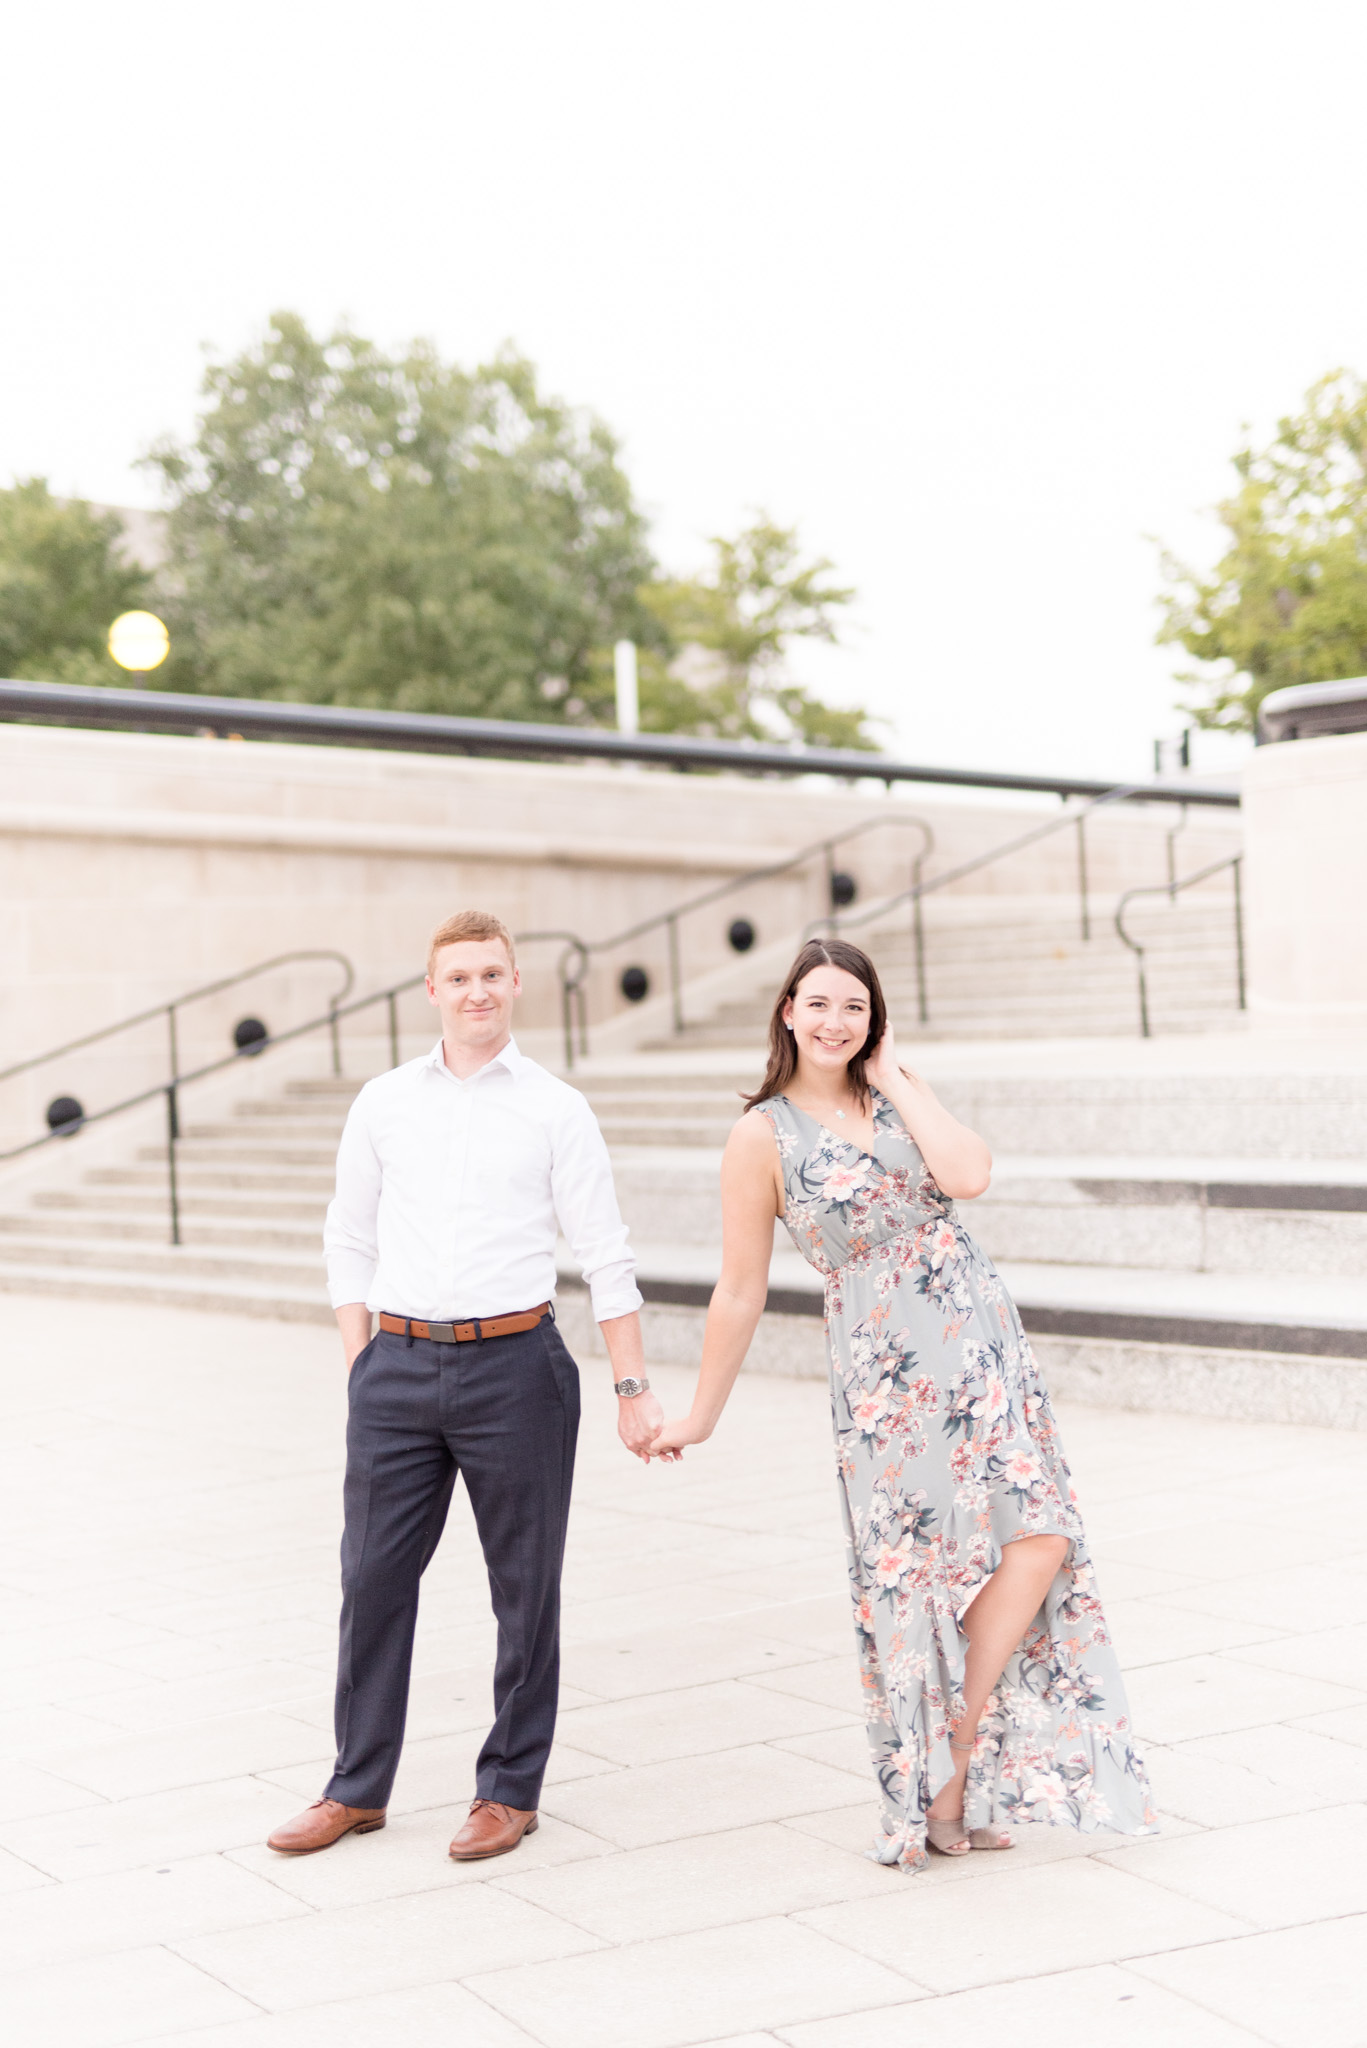 Engaged couple holds hands and smiles at camera.